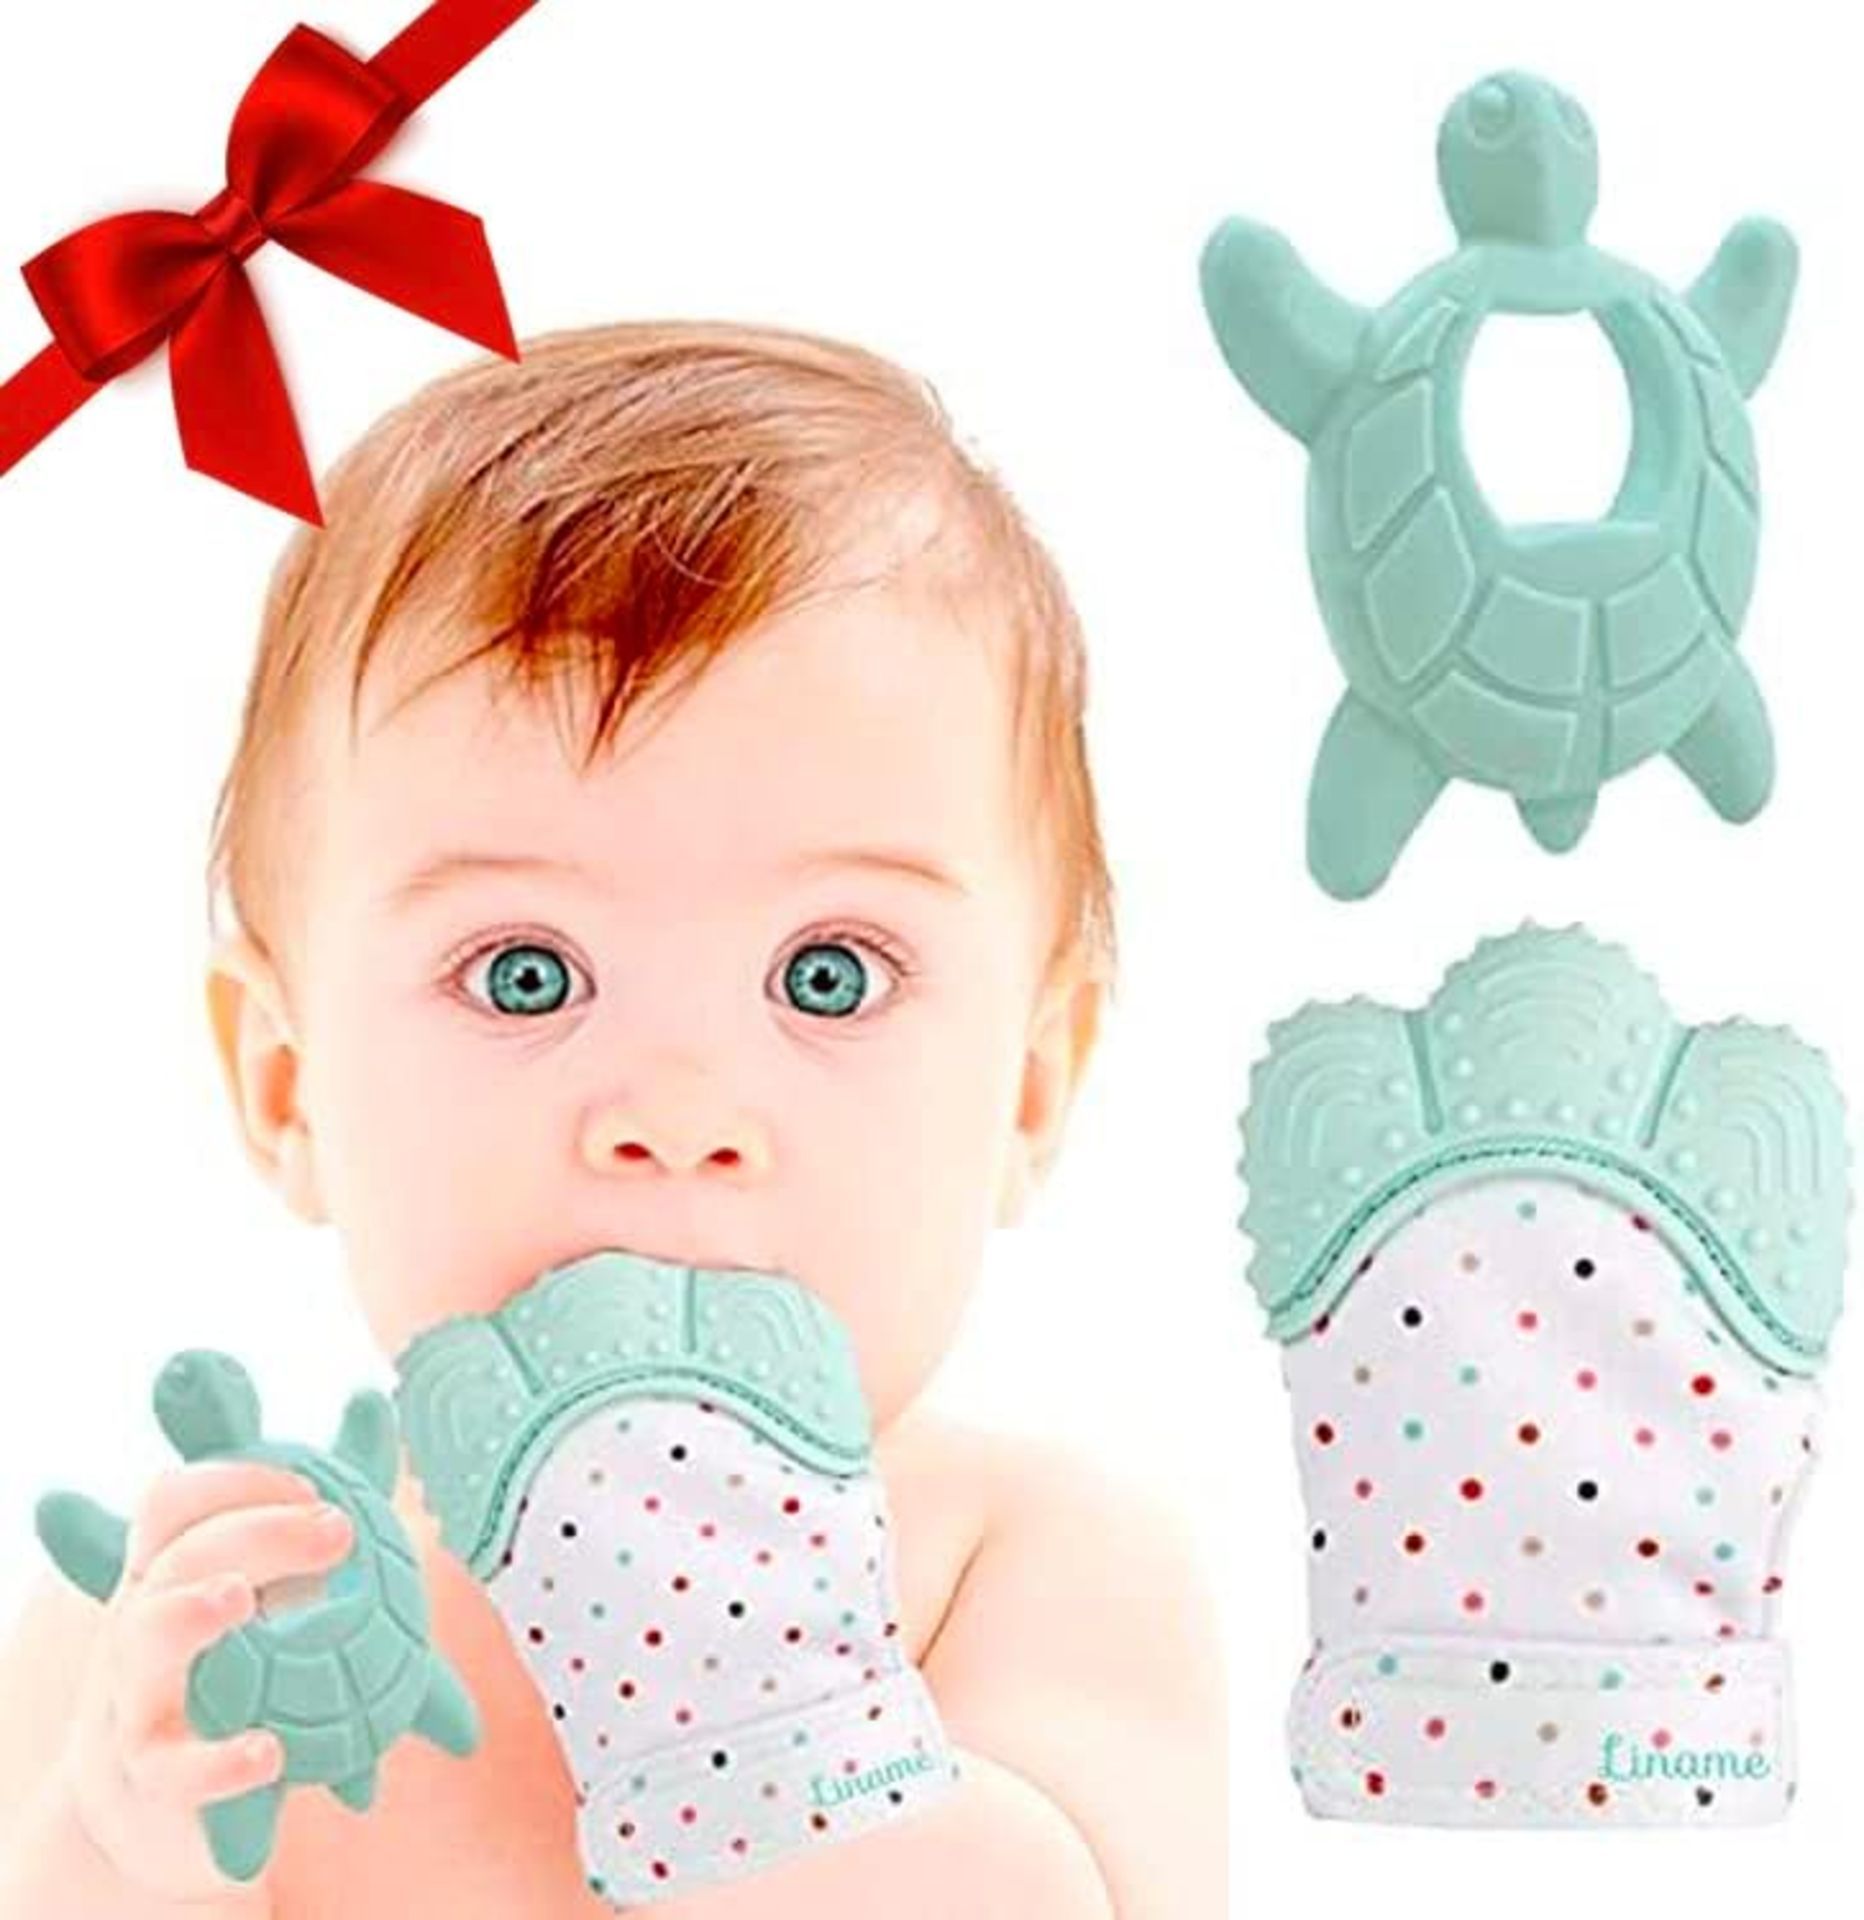 TRADE LOT 250 X BRAND NEW LINAME DELUXE TEETHING KITS TURTLE R11.2/10.7